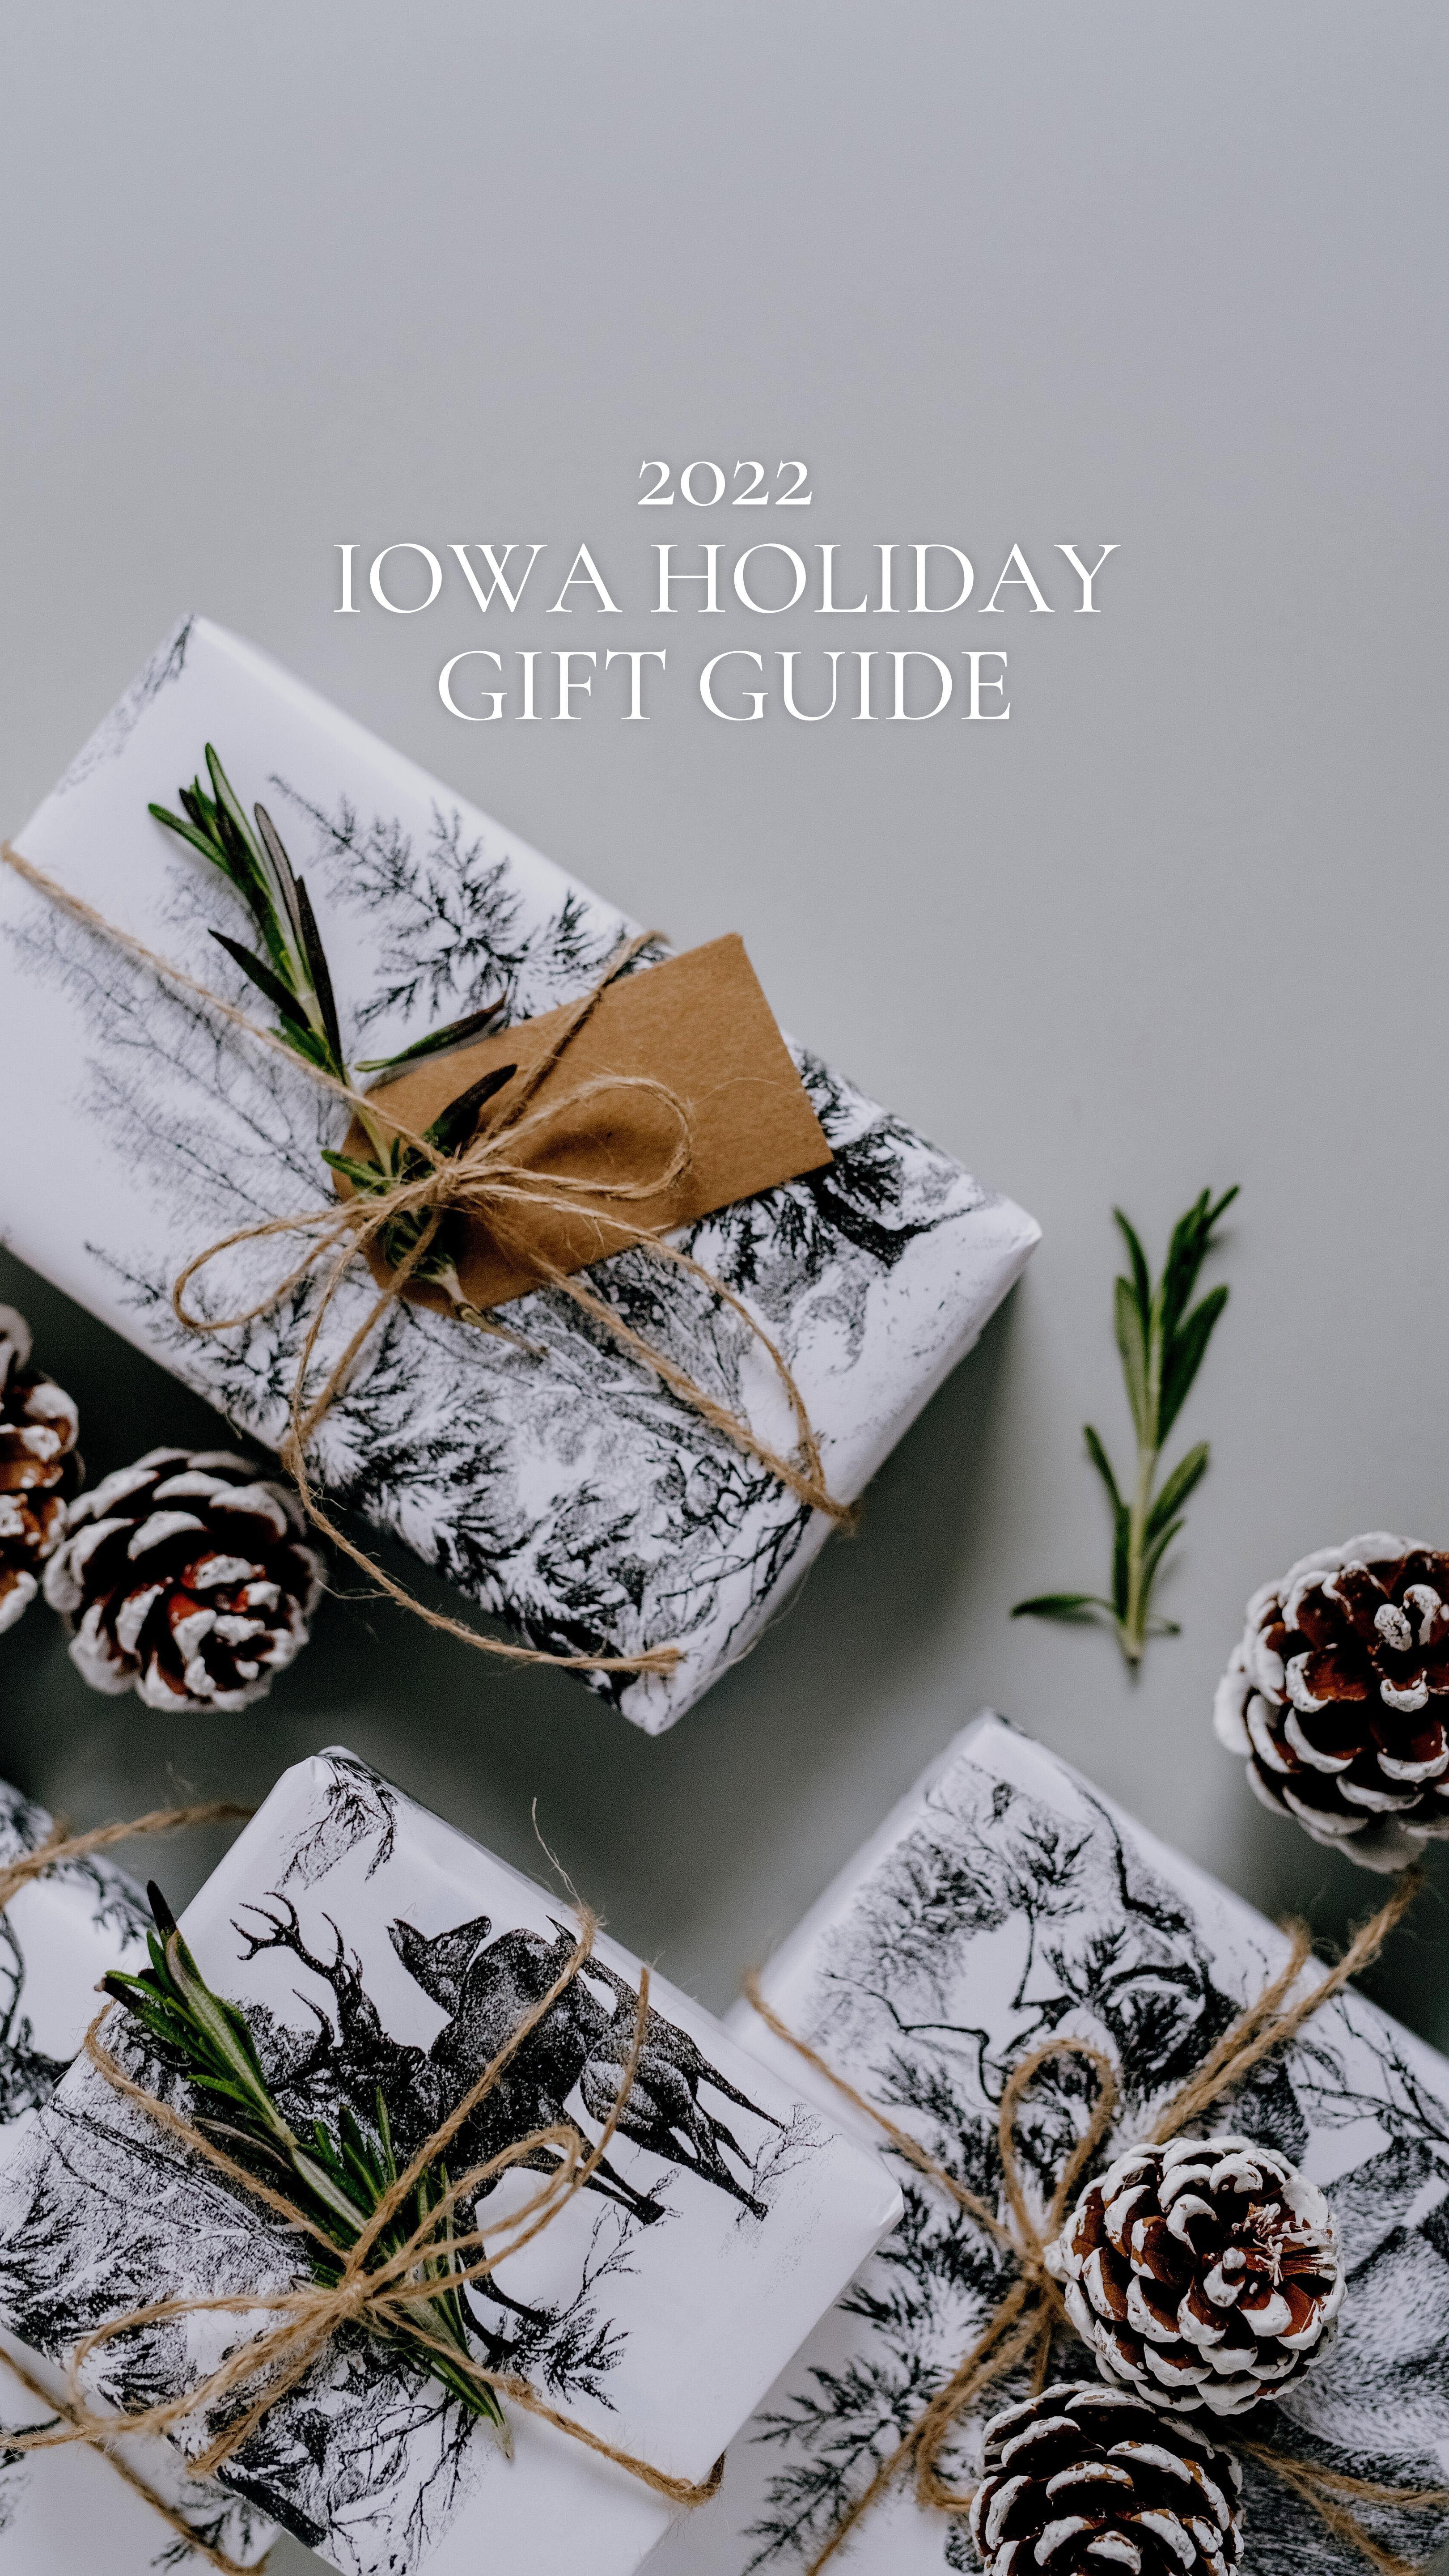 IOWA HOLIDAY GIFT GUIDE 2022 🎁 For beer-loving besties, spa-savoring spouses and coffee-sipping siblings, this Iowa holiday gift guide offers up fab ideas for fulfilling your shopping list (and supporting local business). Read the article using the link in our bio!